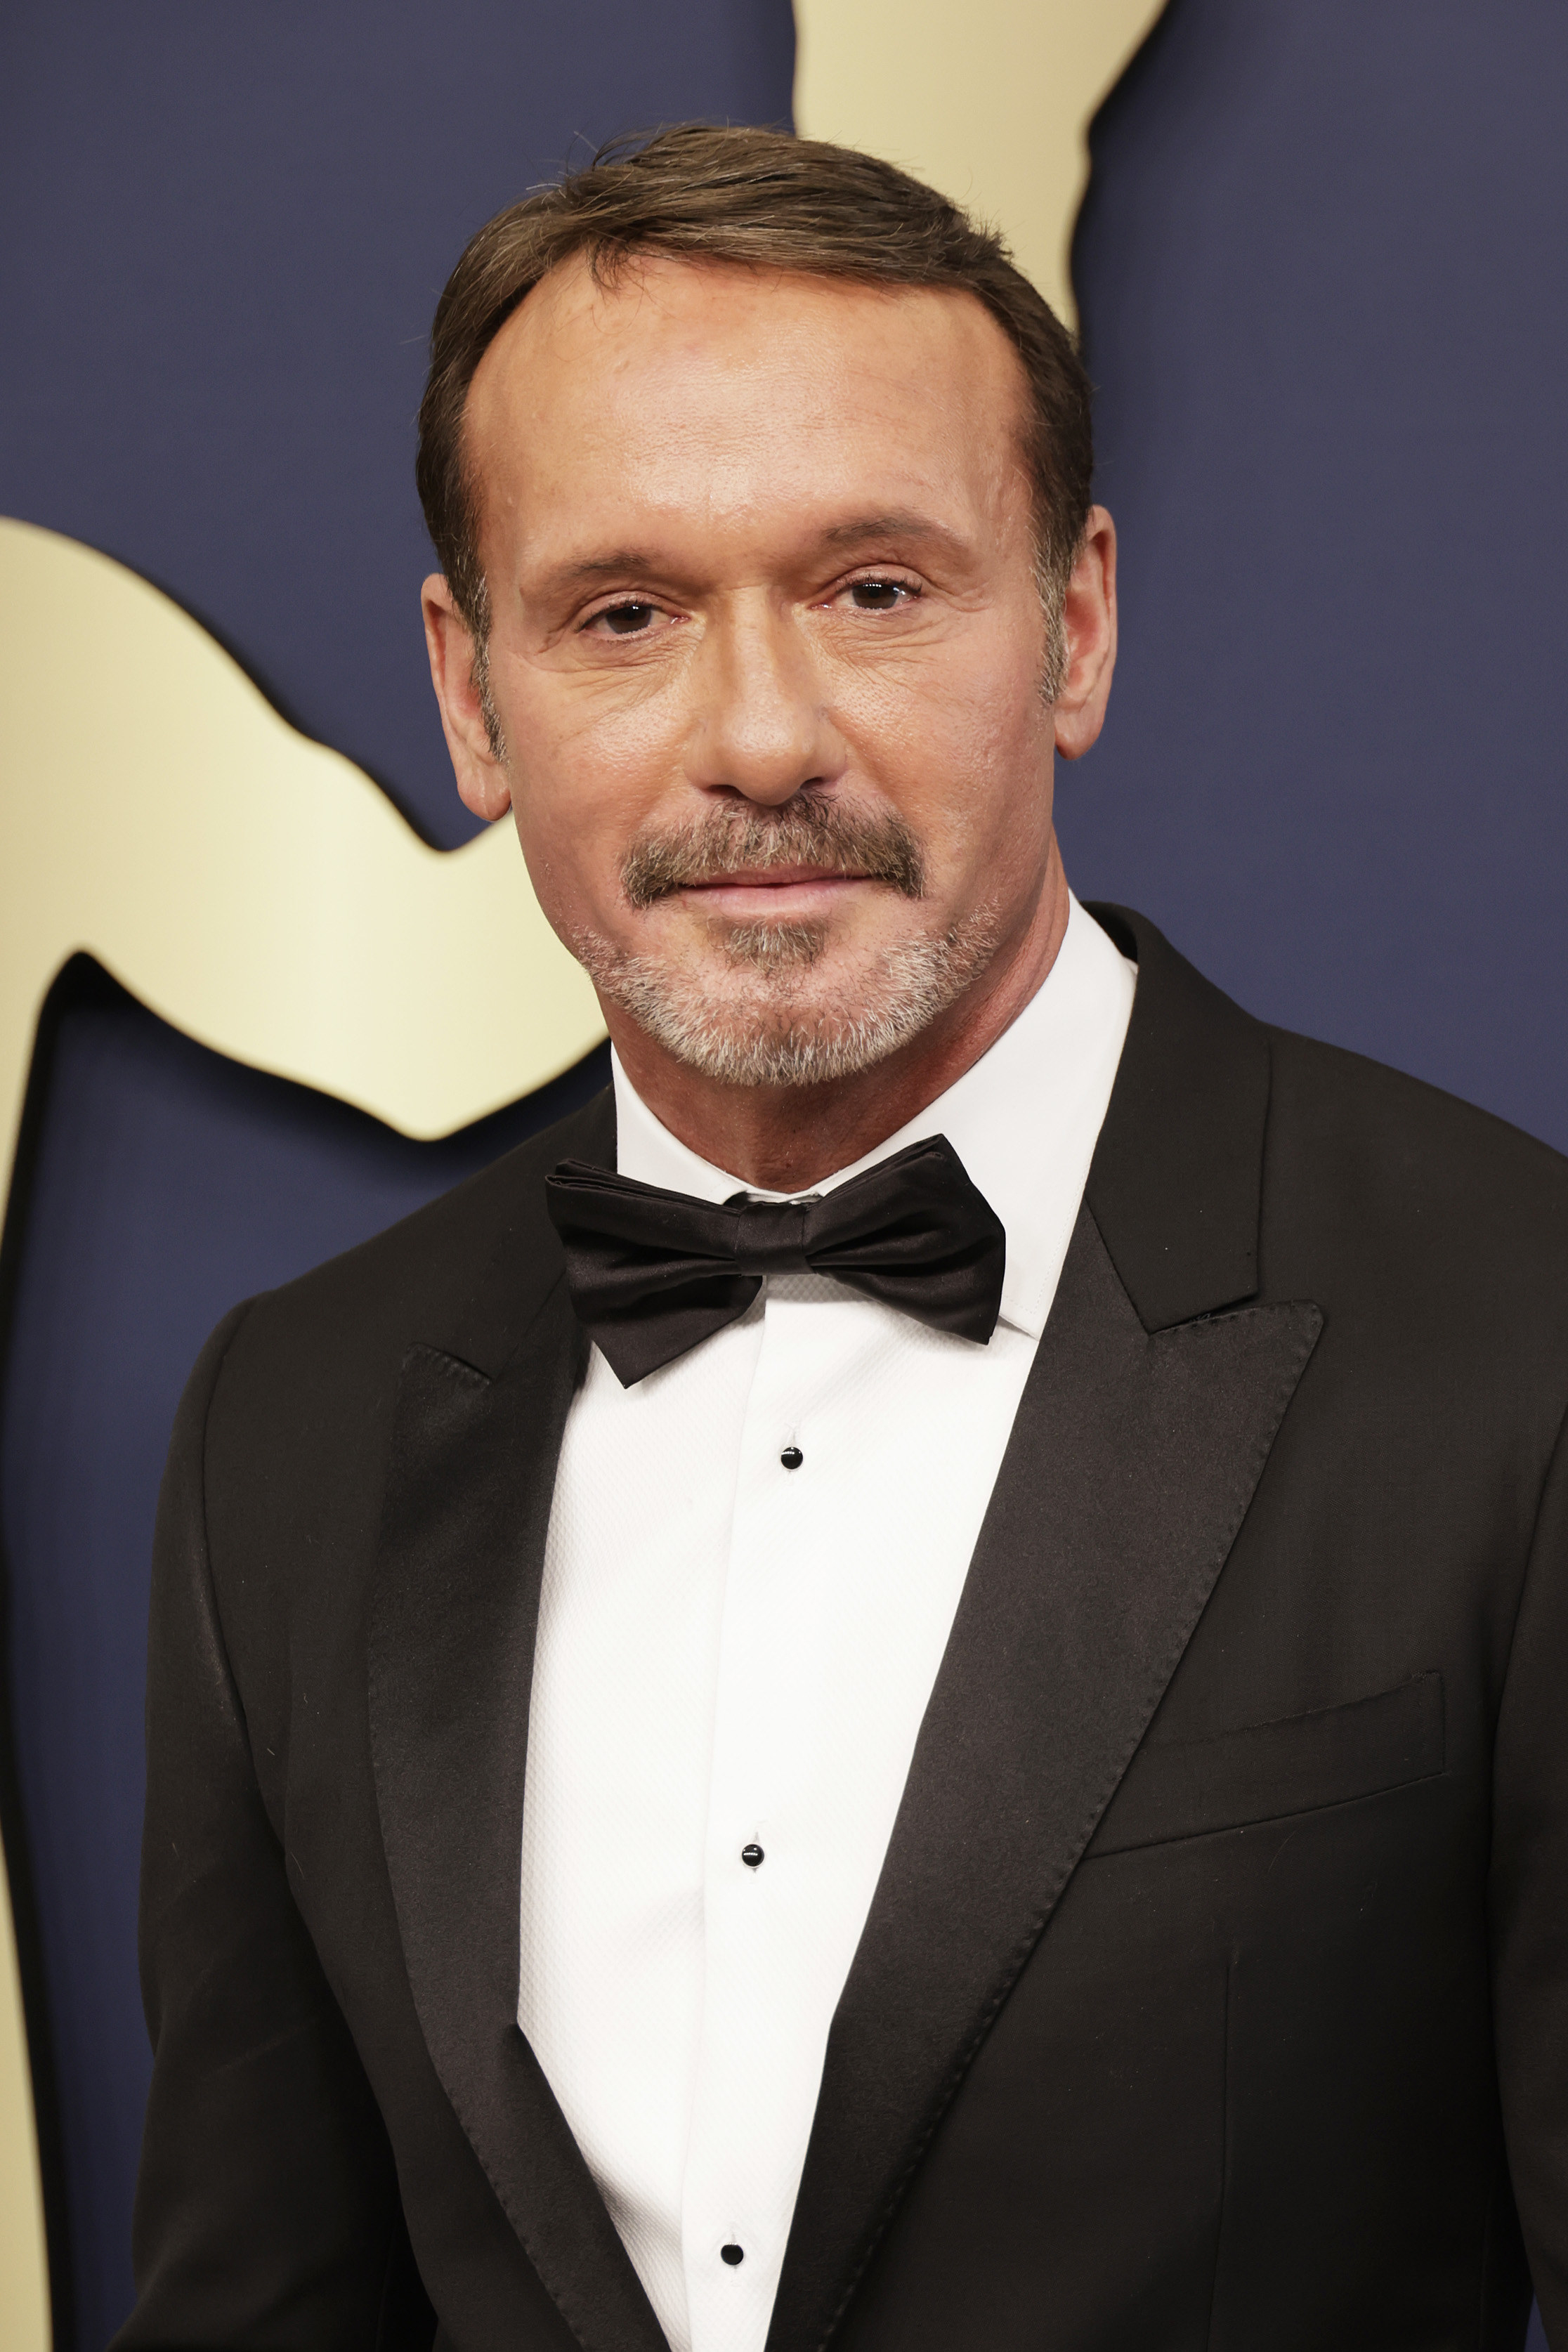 Tim McGraw poses at the 2022 Screen Actors Guild Awards